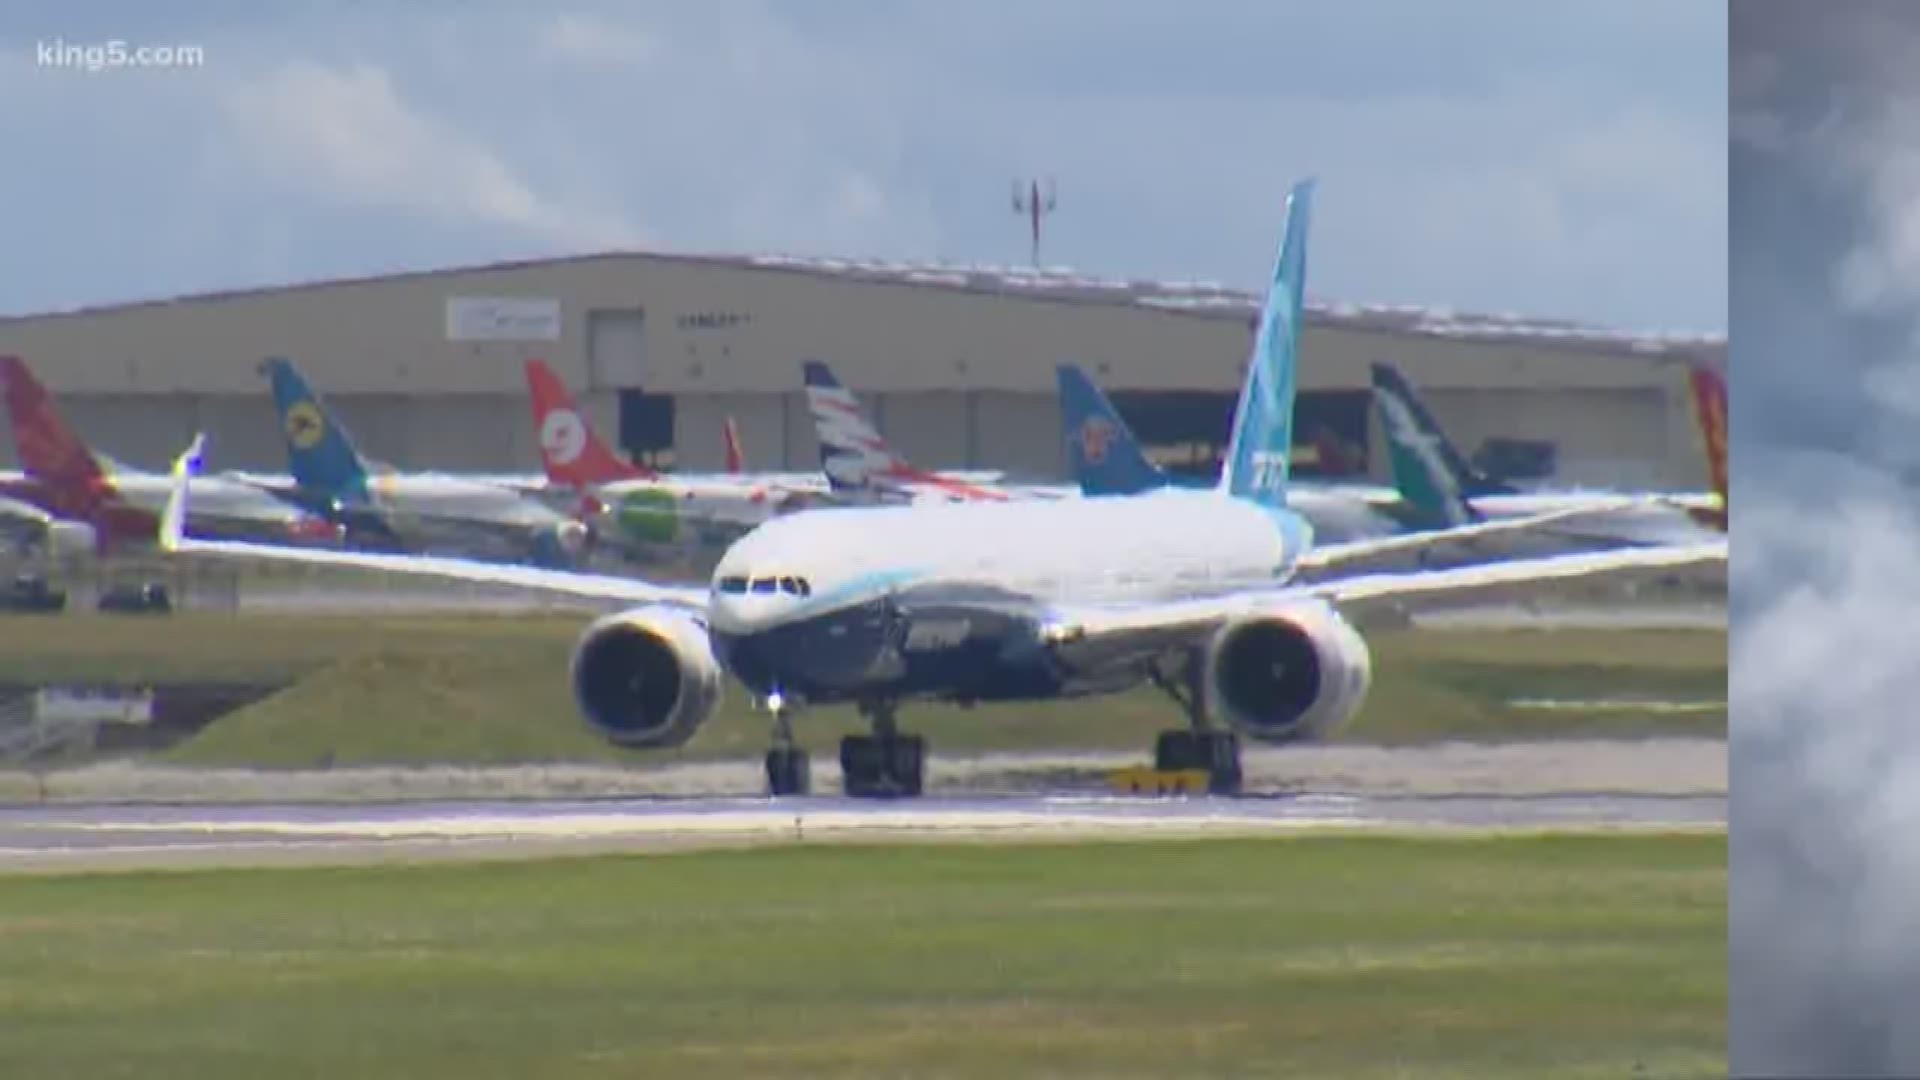 Boeing suspended what was supposed to be the final load testing on the new 777X airplane after crews encountered an “issue” during the test.